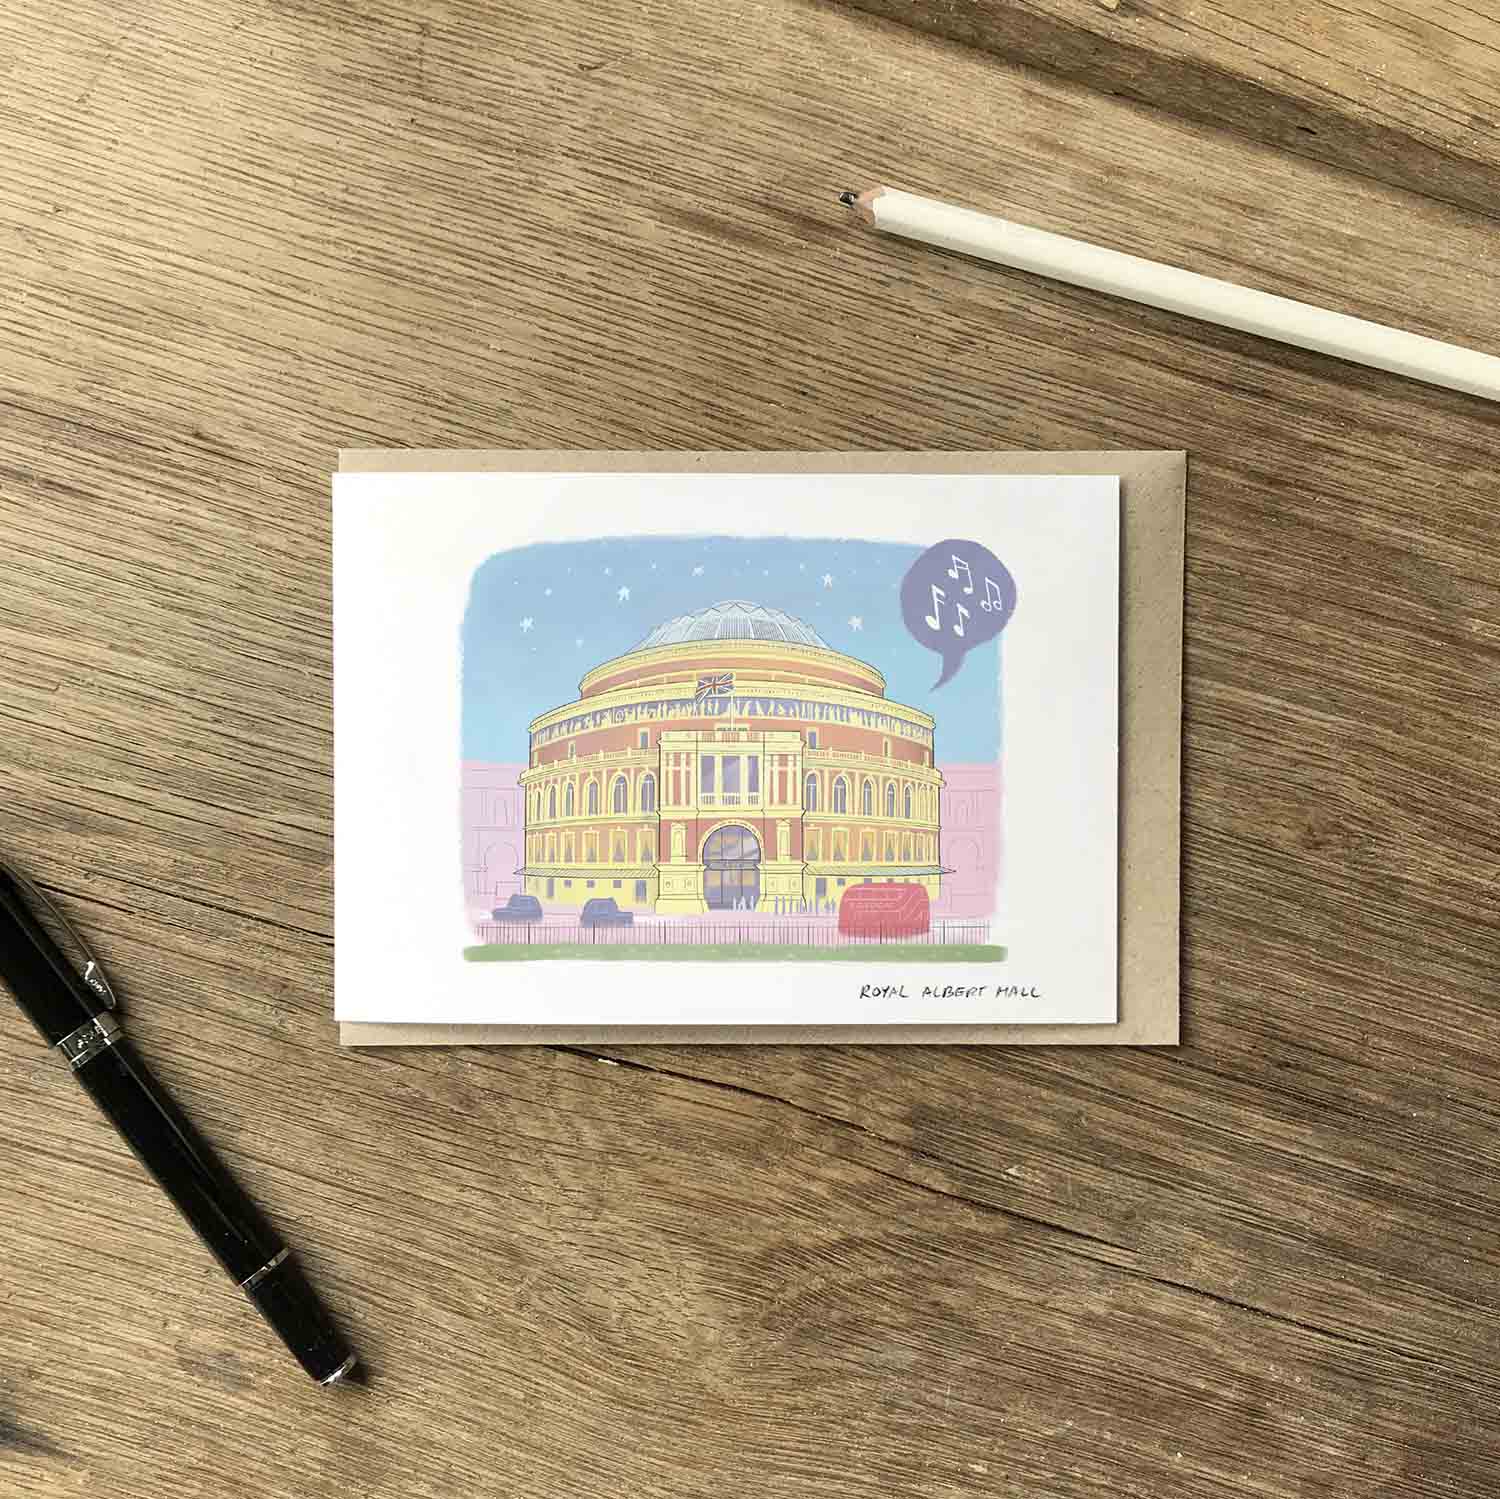 London's Royal Albert Hall beautifully illustrated on a greeting card by mike green illustration.